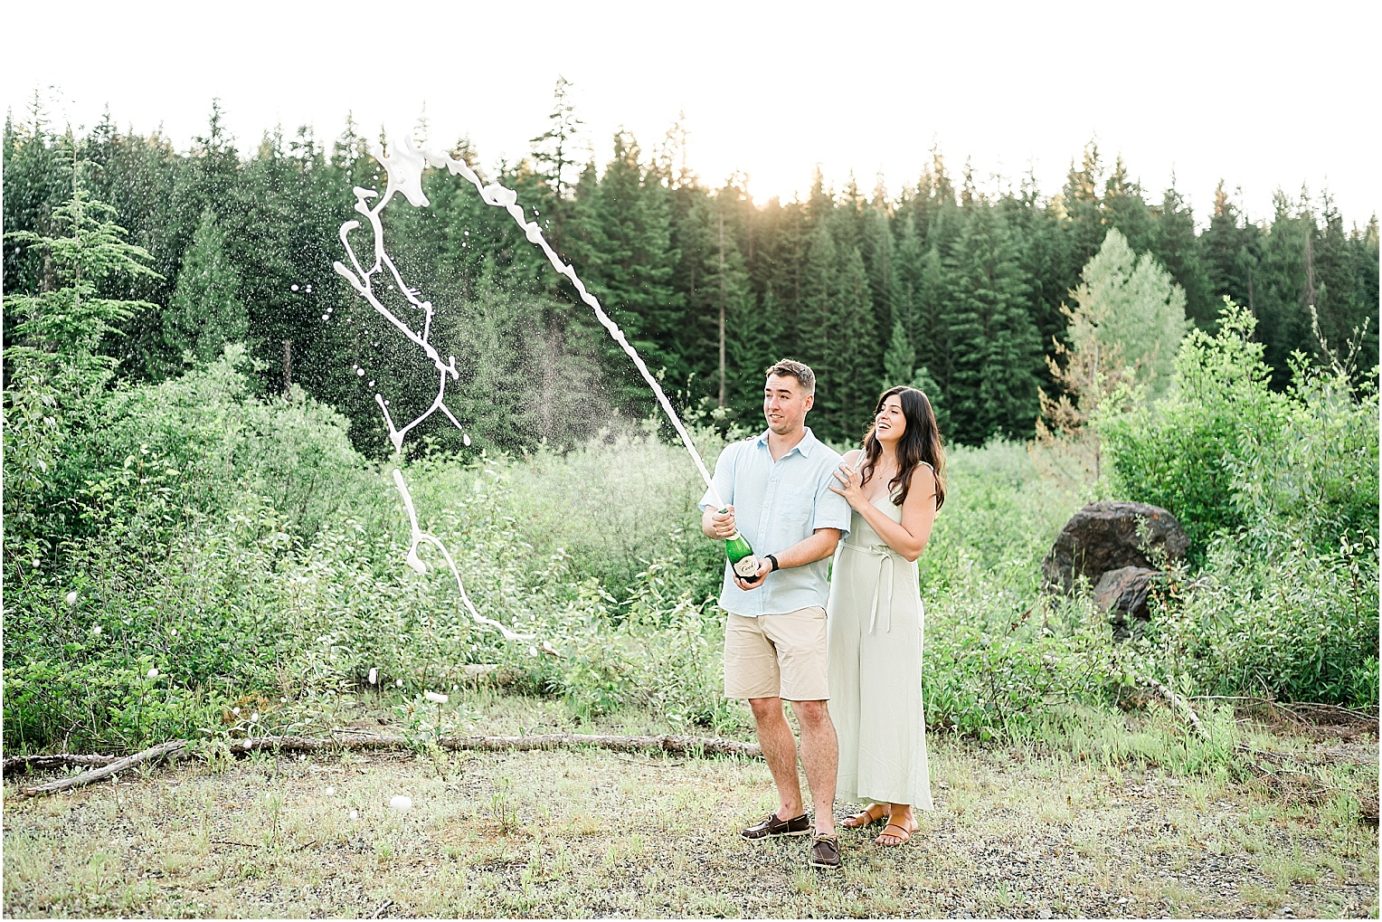 Gold Creek Pond engagement session Jon and Kristen couple popping champagne